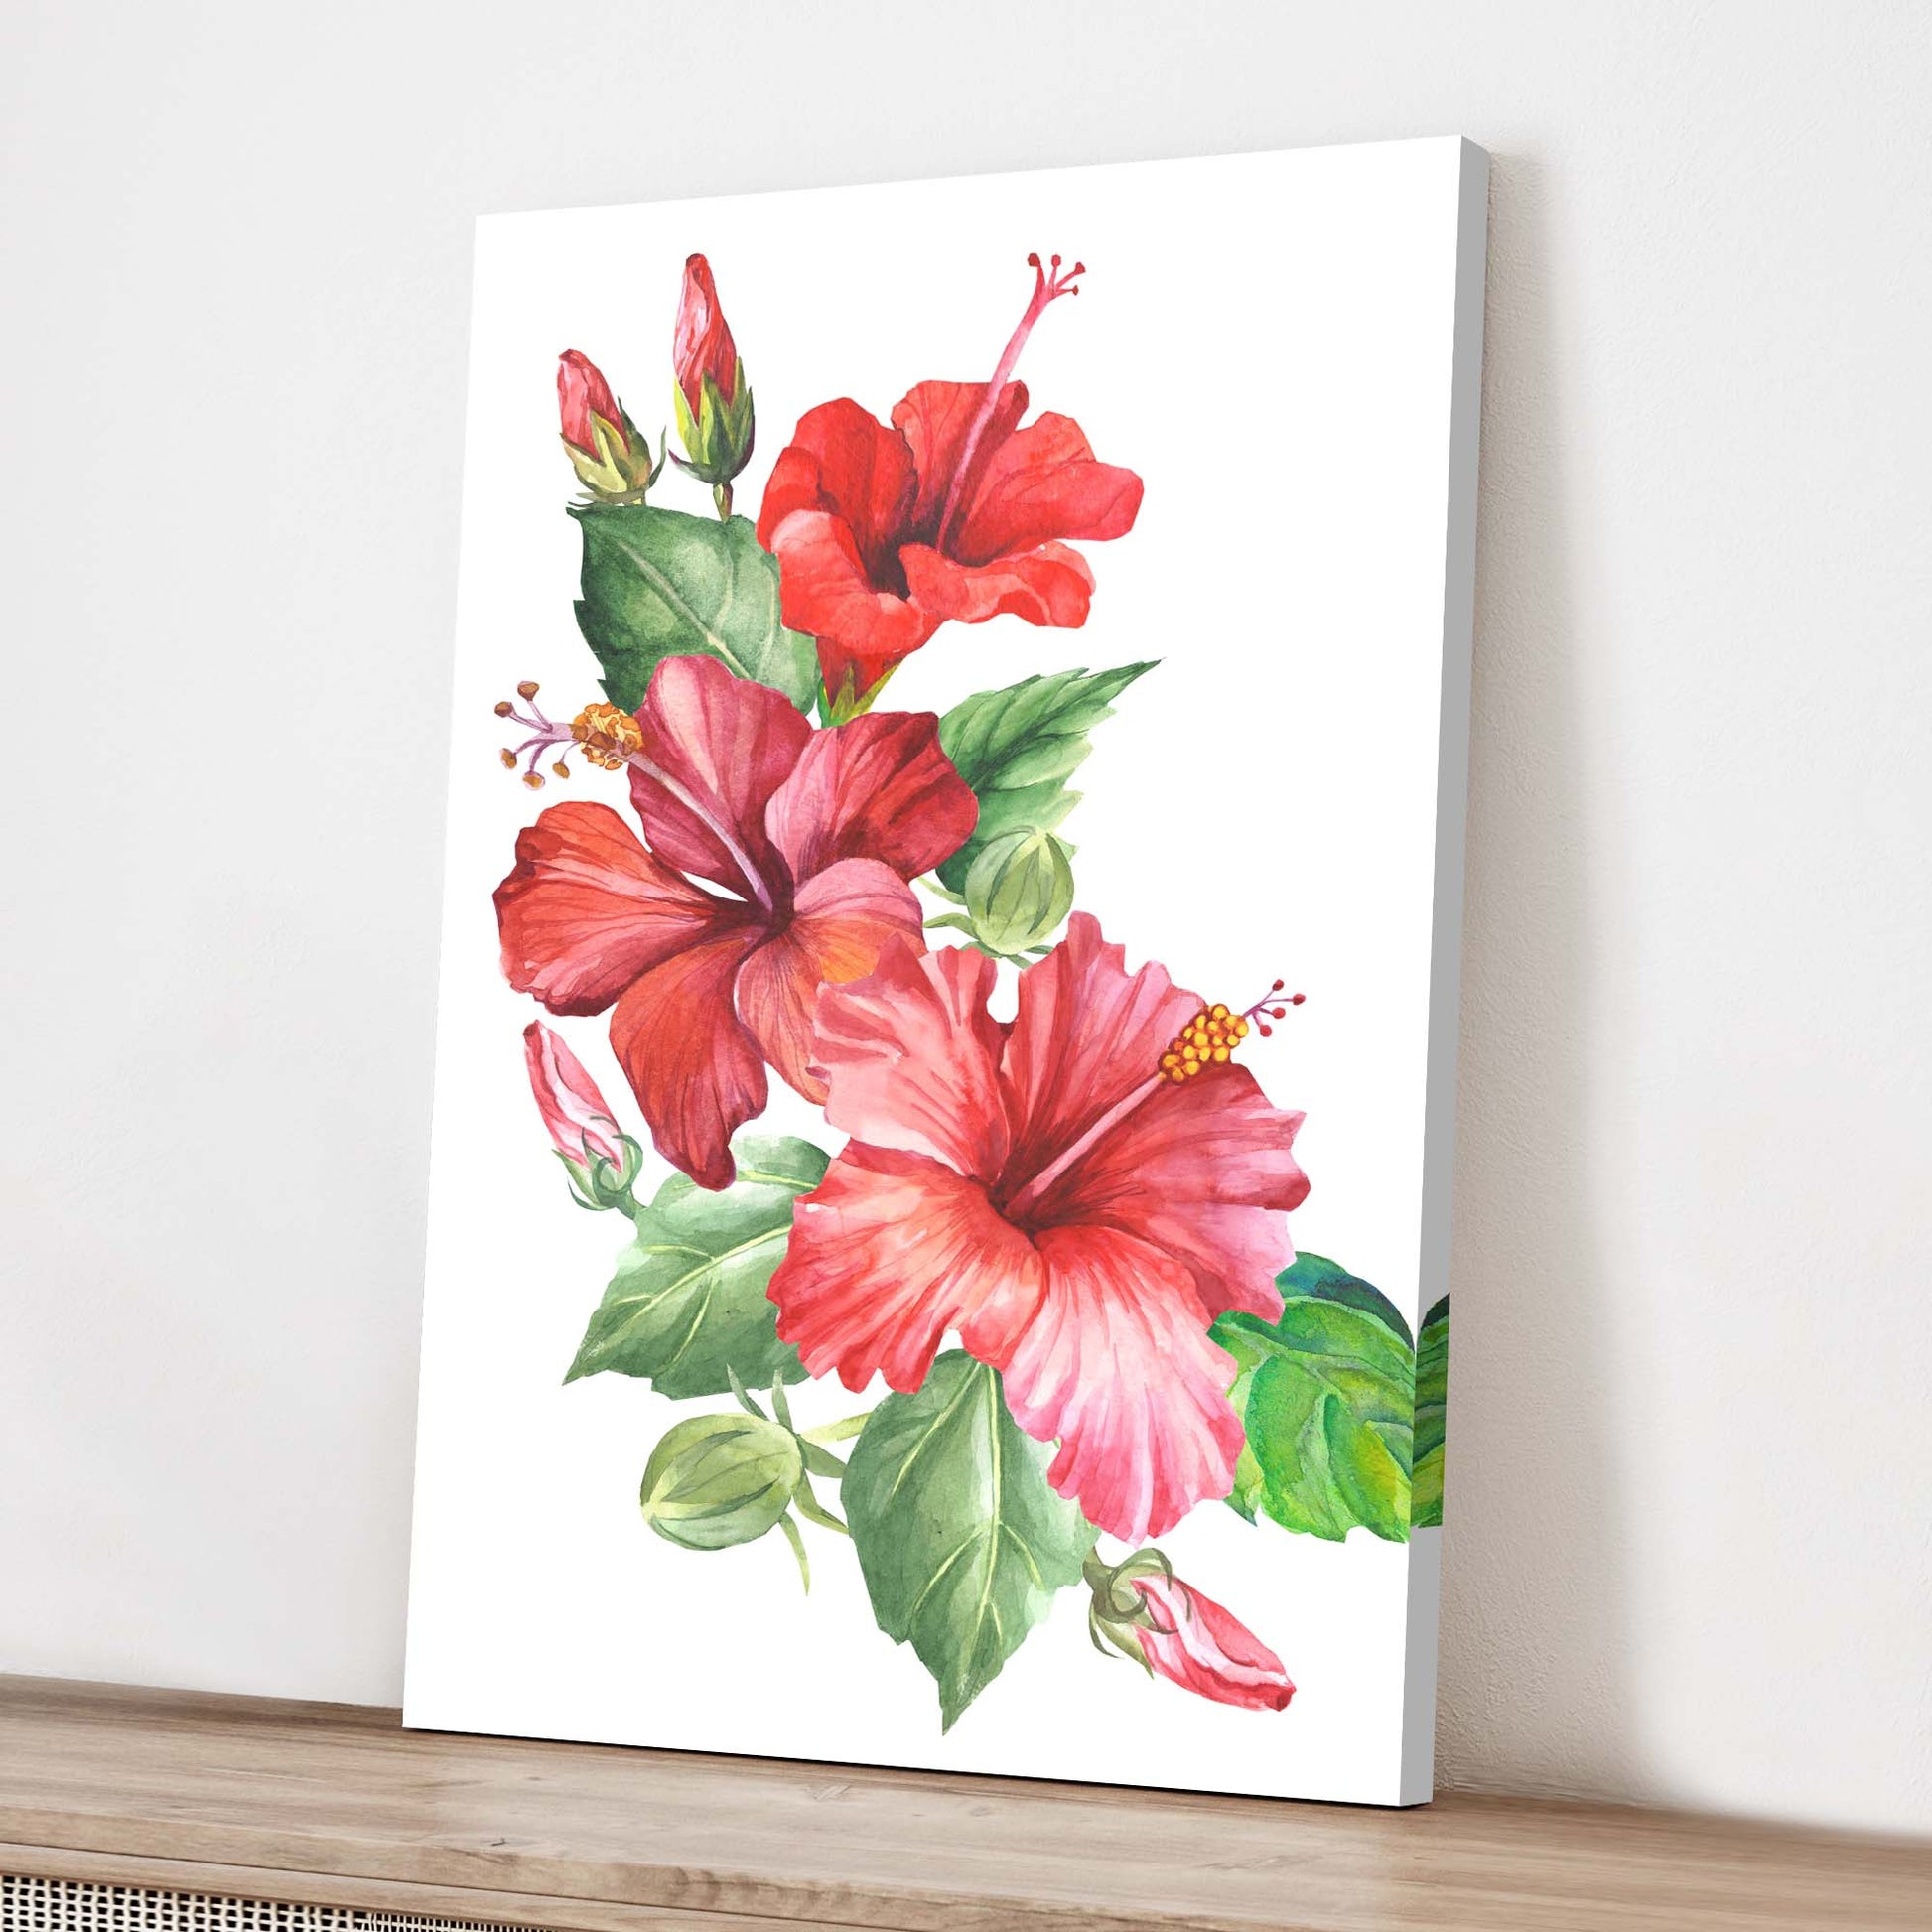 Flowers Exotic Hibiscus Canvas Wall Art Style 2 - Image by Tailored Canvases